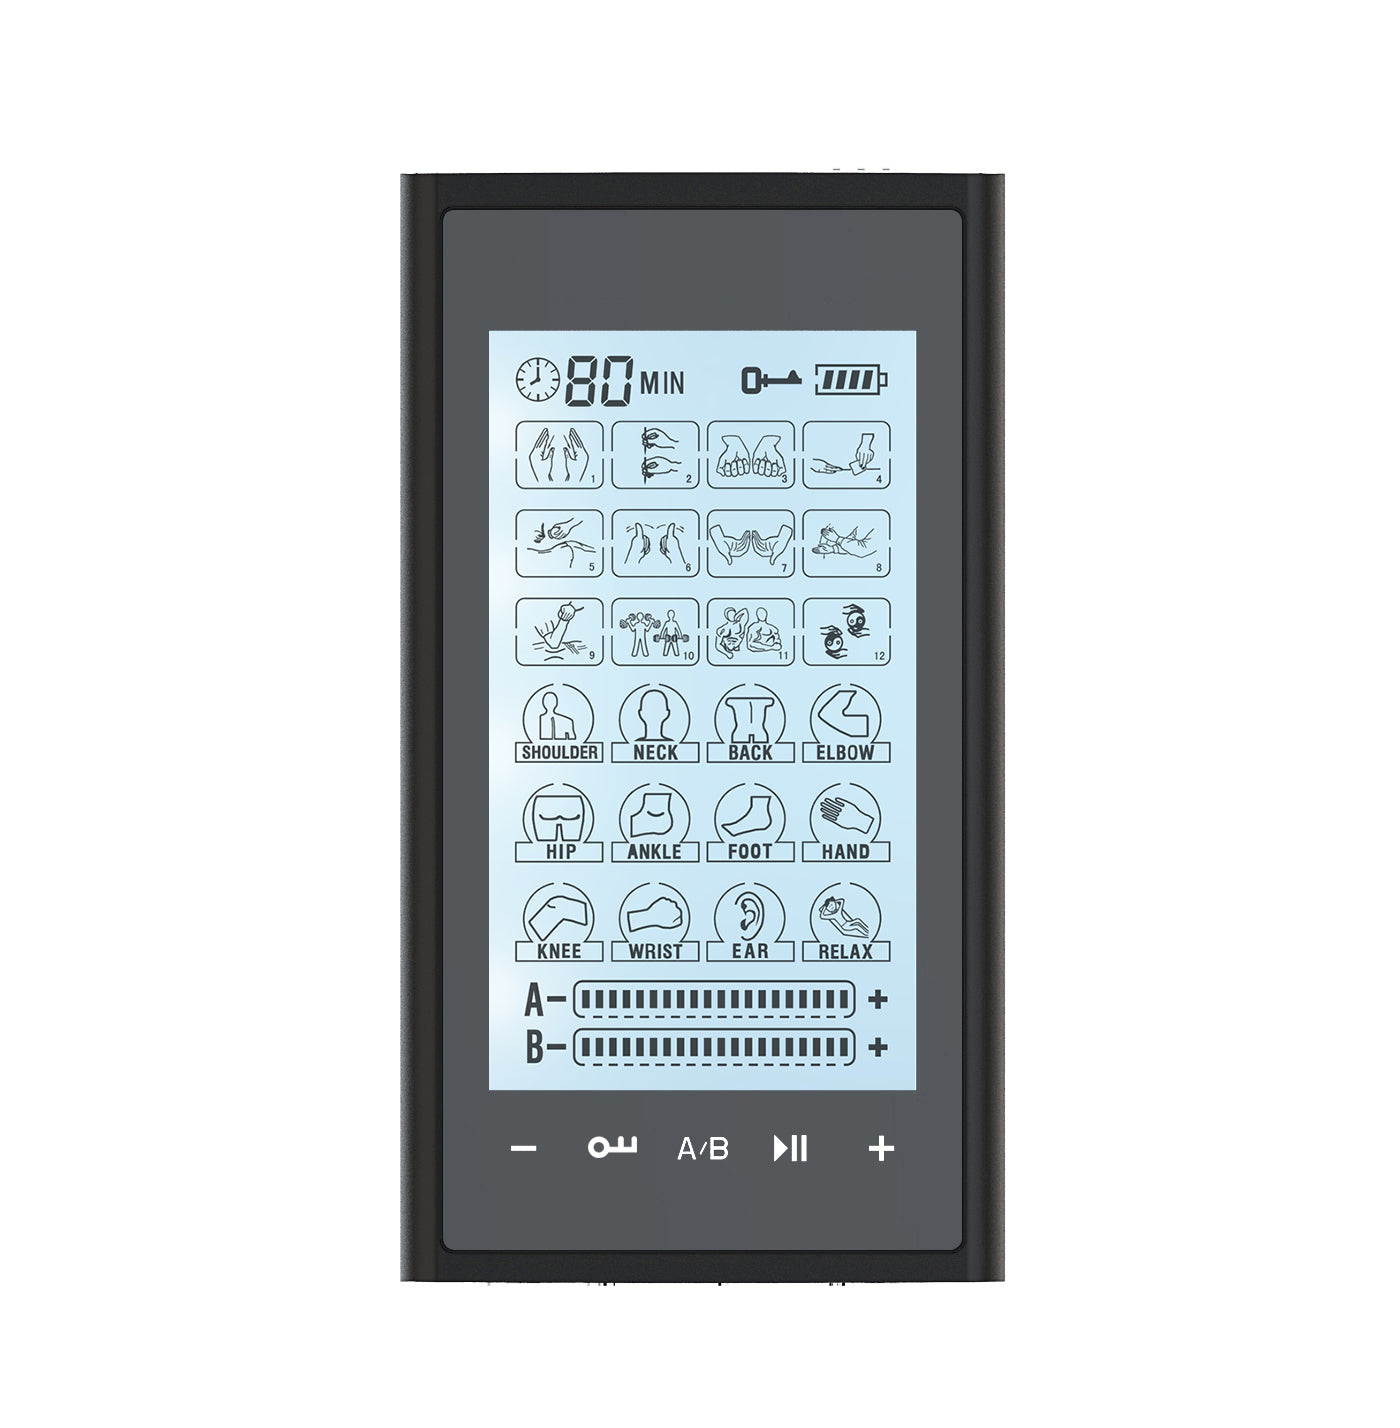 2020 Version Touch Screen T24AB2 TENS Unit & Muscle Stimulator - 2 Year Warranty - HealthmateForever.com